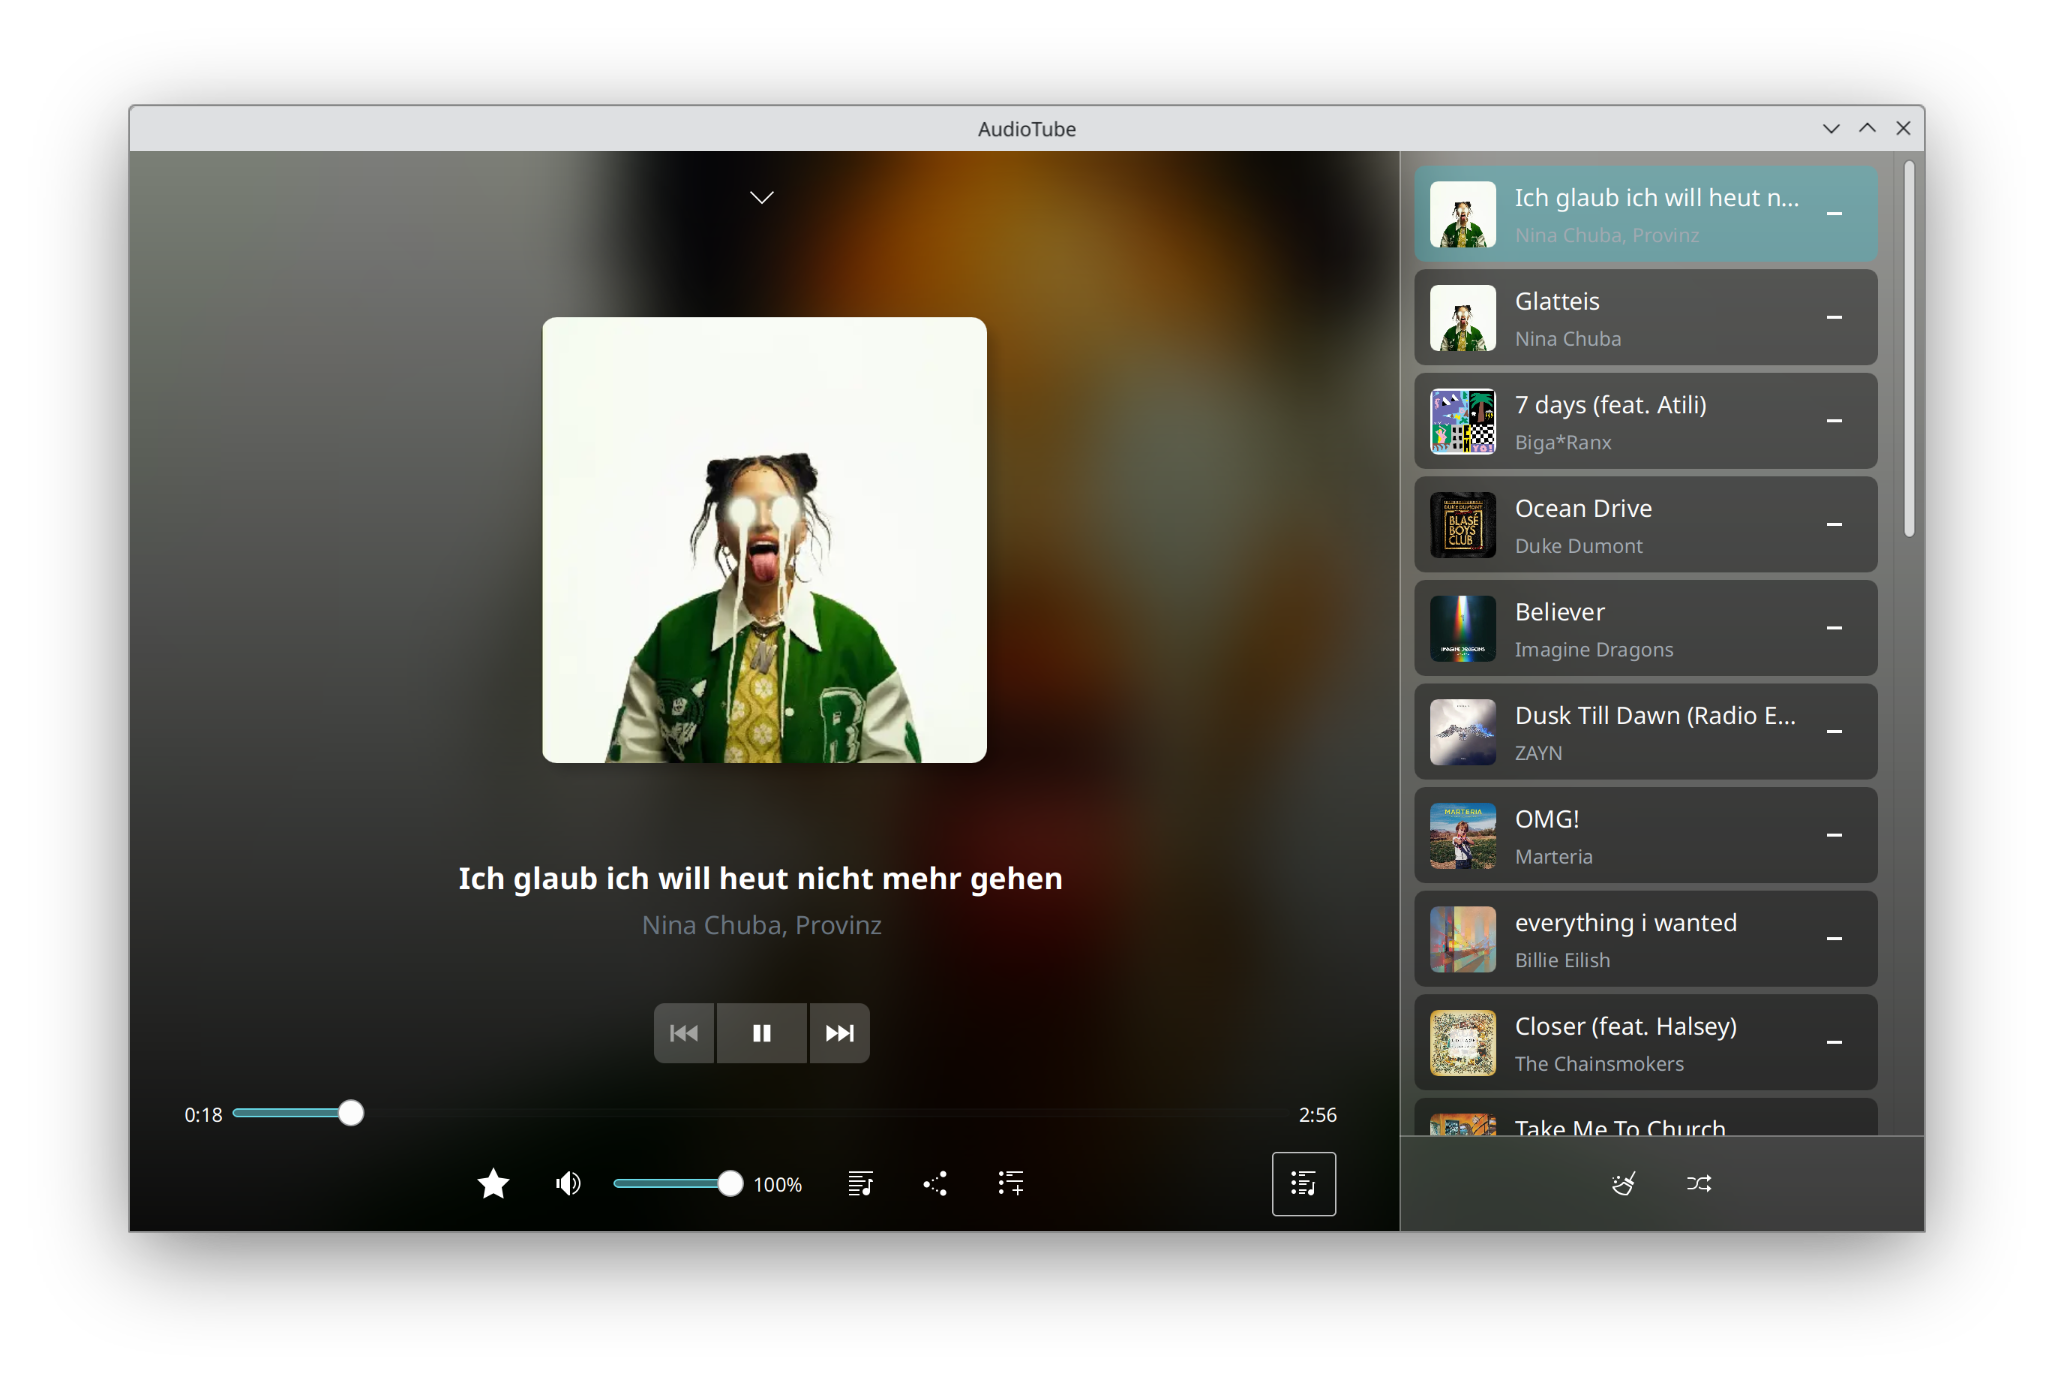 The new music player